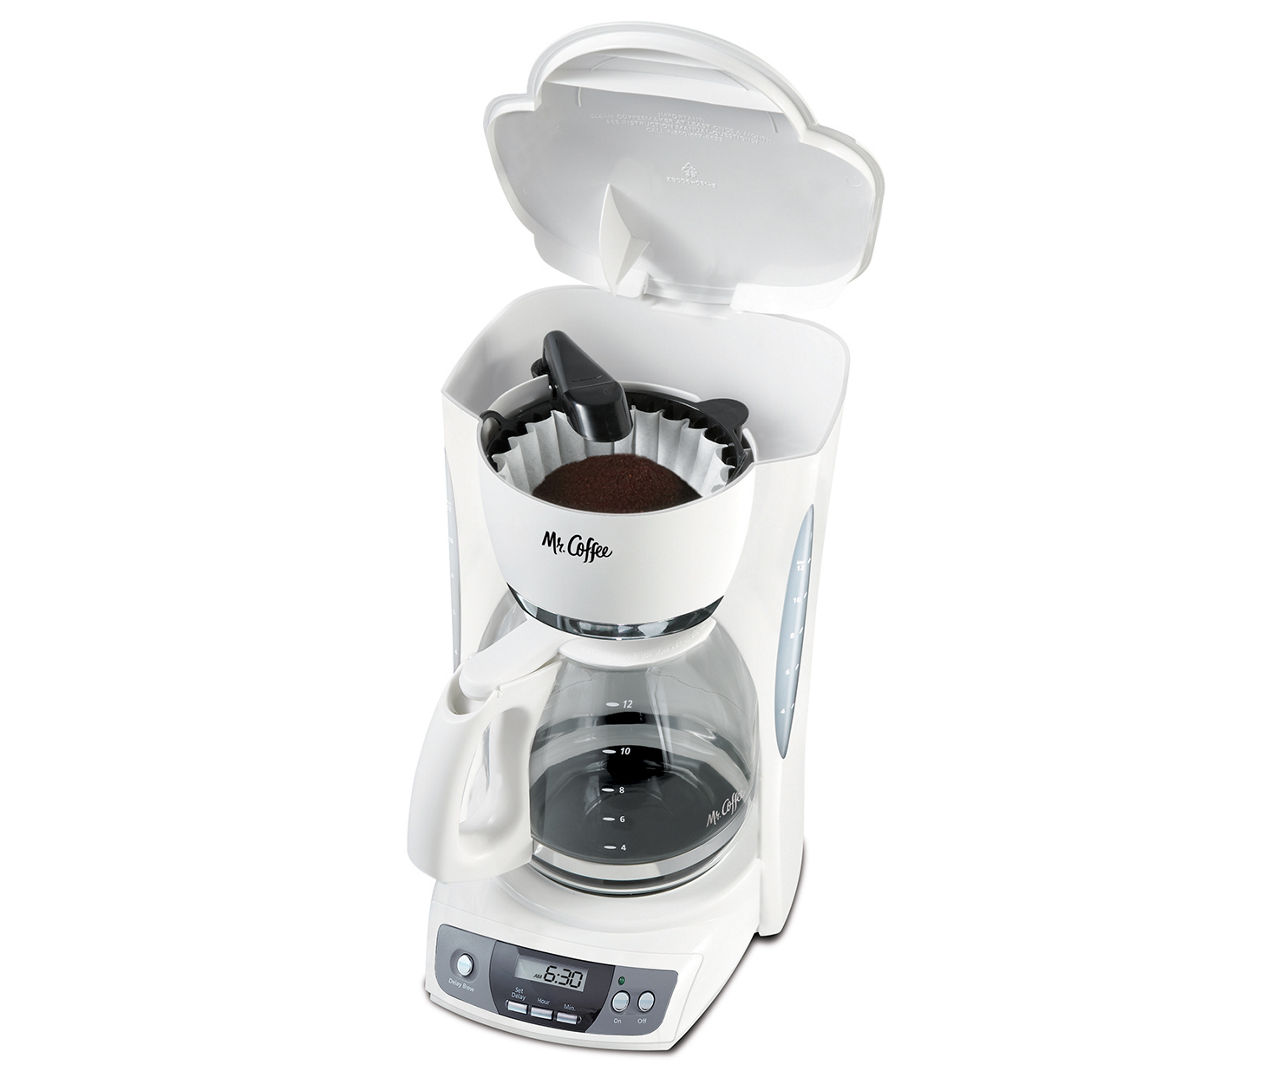 Mr. Coffee 12 Cup Switch Coffeemaker White